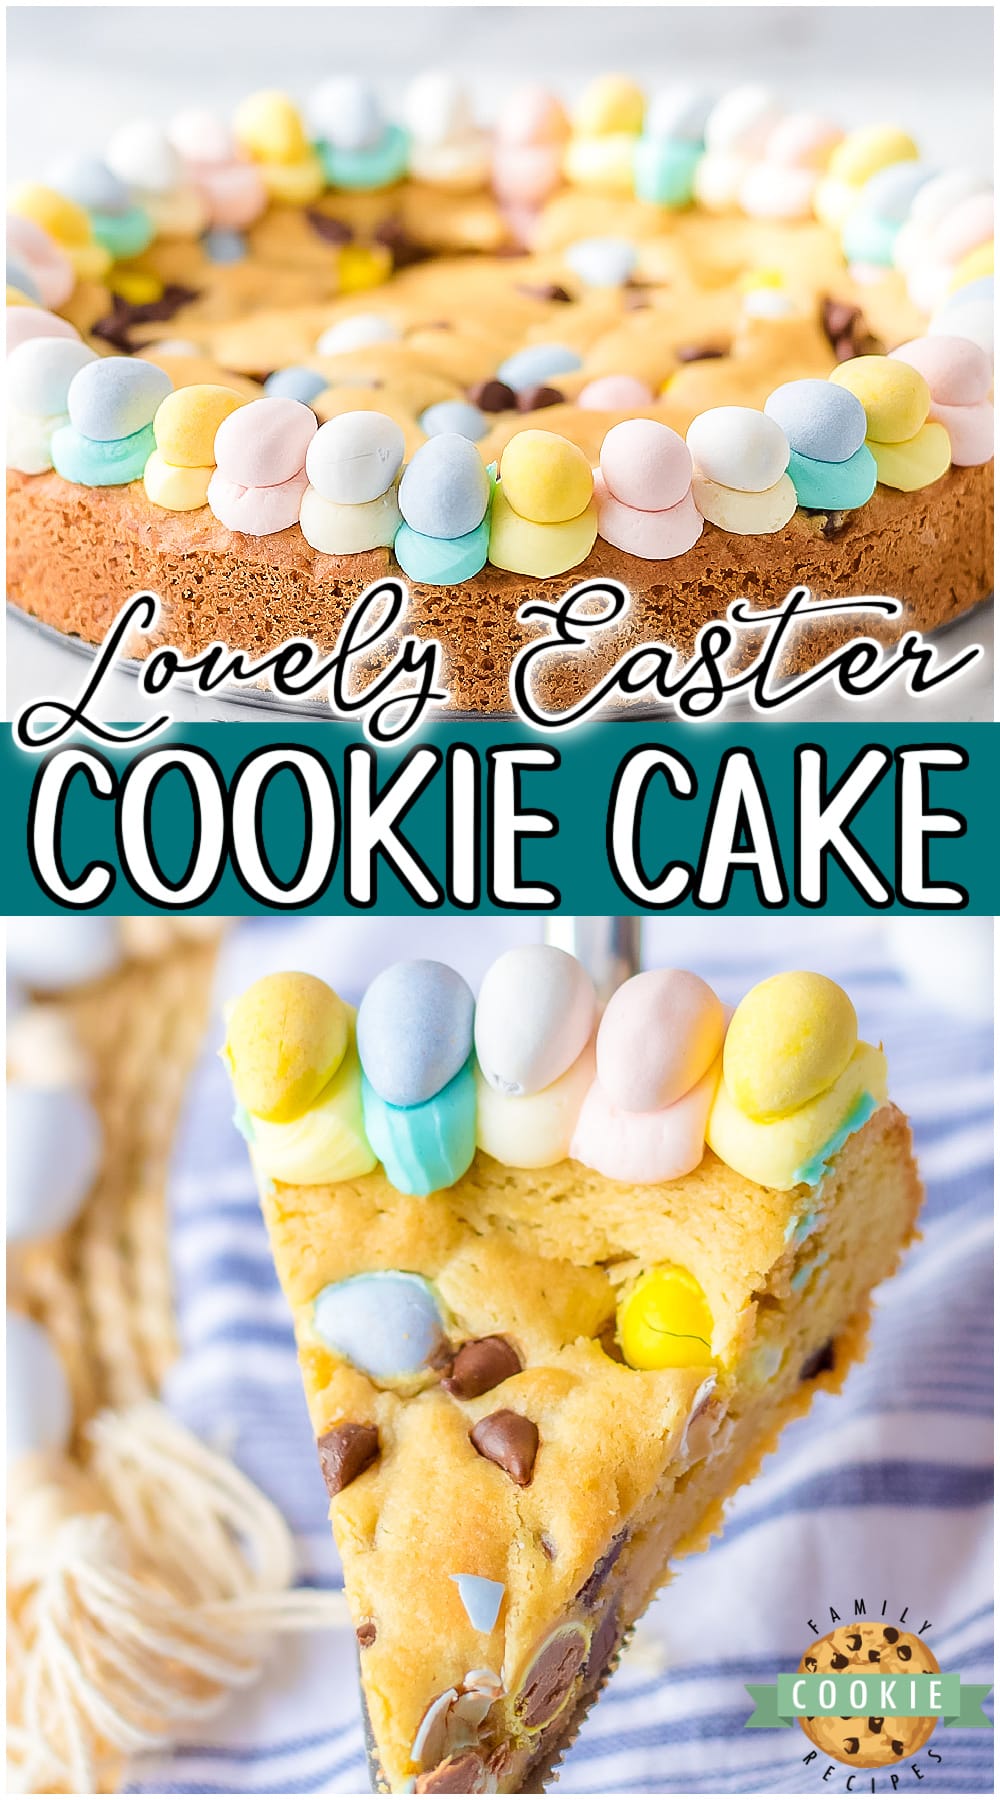 Festive Easter Cookie Cake that's soft, chewy & studded with chocolate chips & chocolate Easter eggs! A thick buttercream frosting rings the edges with more chocolate eggs. It is delicious and perfect for Easter!